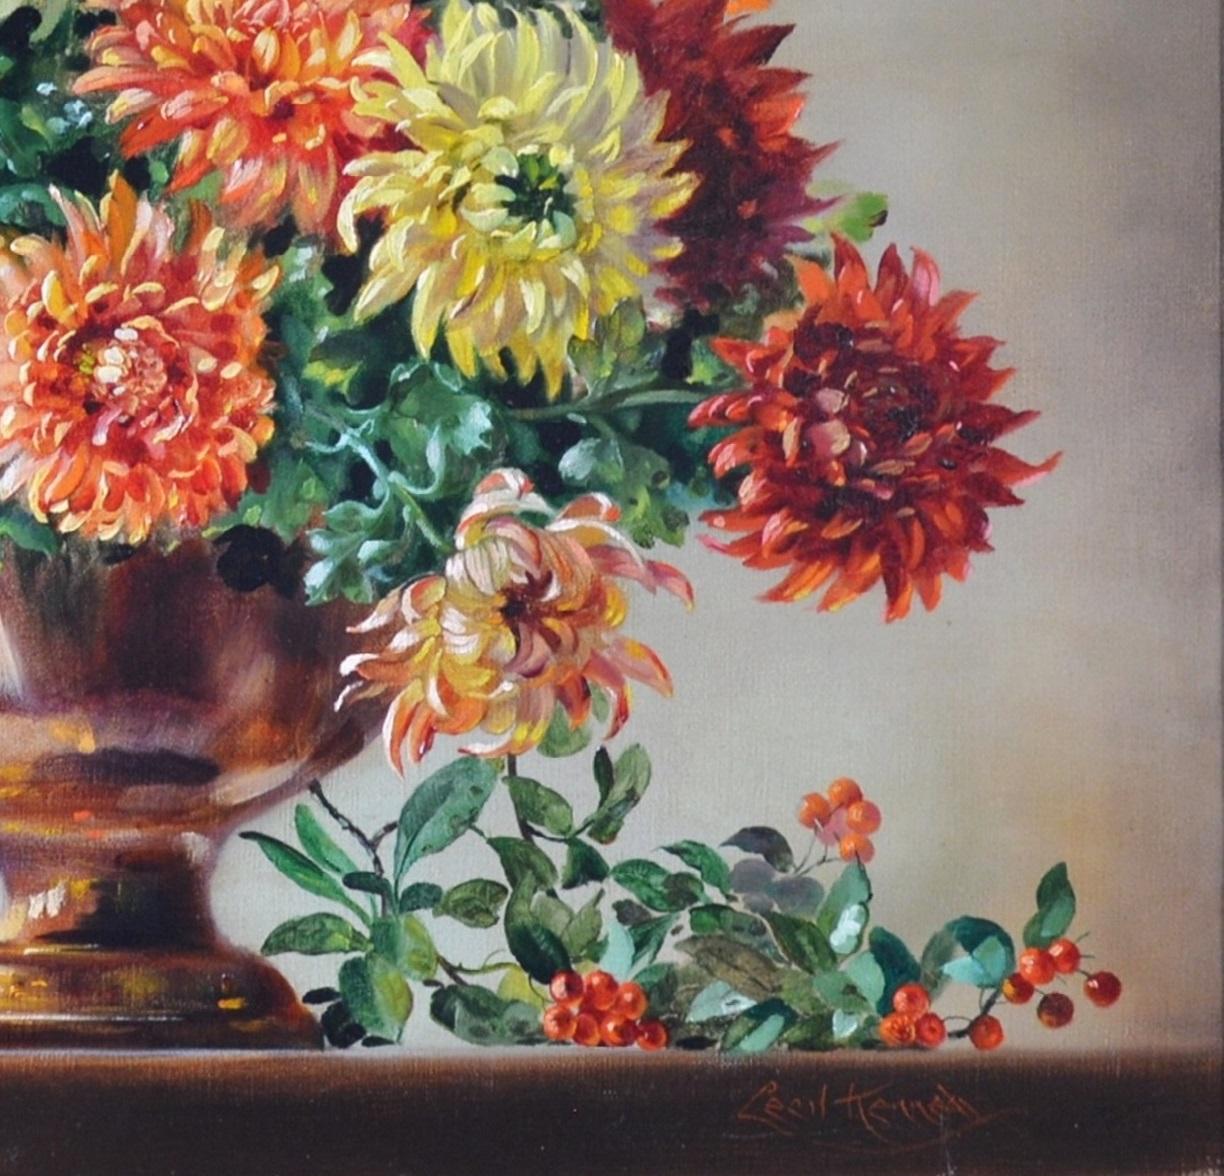 ‘Chrysanthemums’ by Cecil Kennedy (1905-1997). This fine floral style life oil on canvas depicting chrysanthemums in a copper vase is signed by the artist and presented in a gold metal leaf post-Impressionist frame. 

All our paintings are sold in